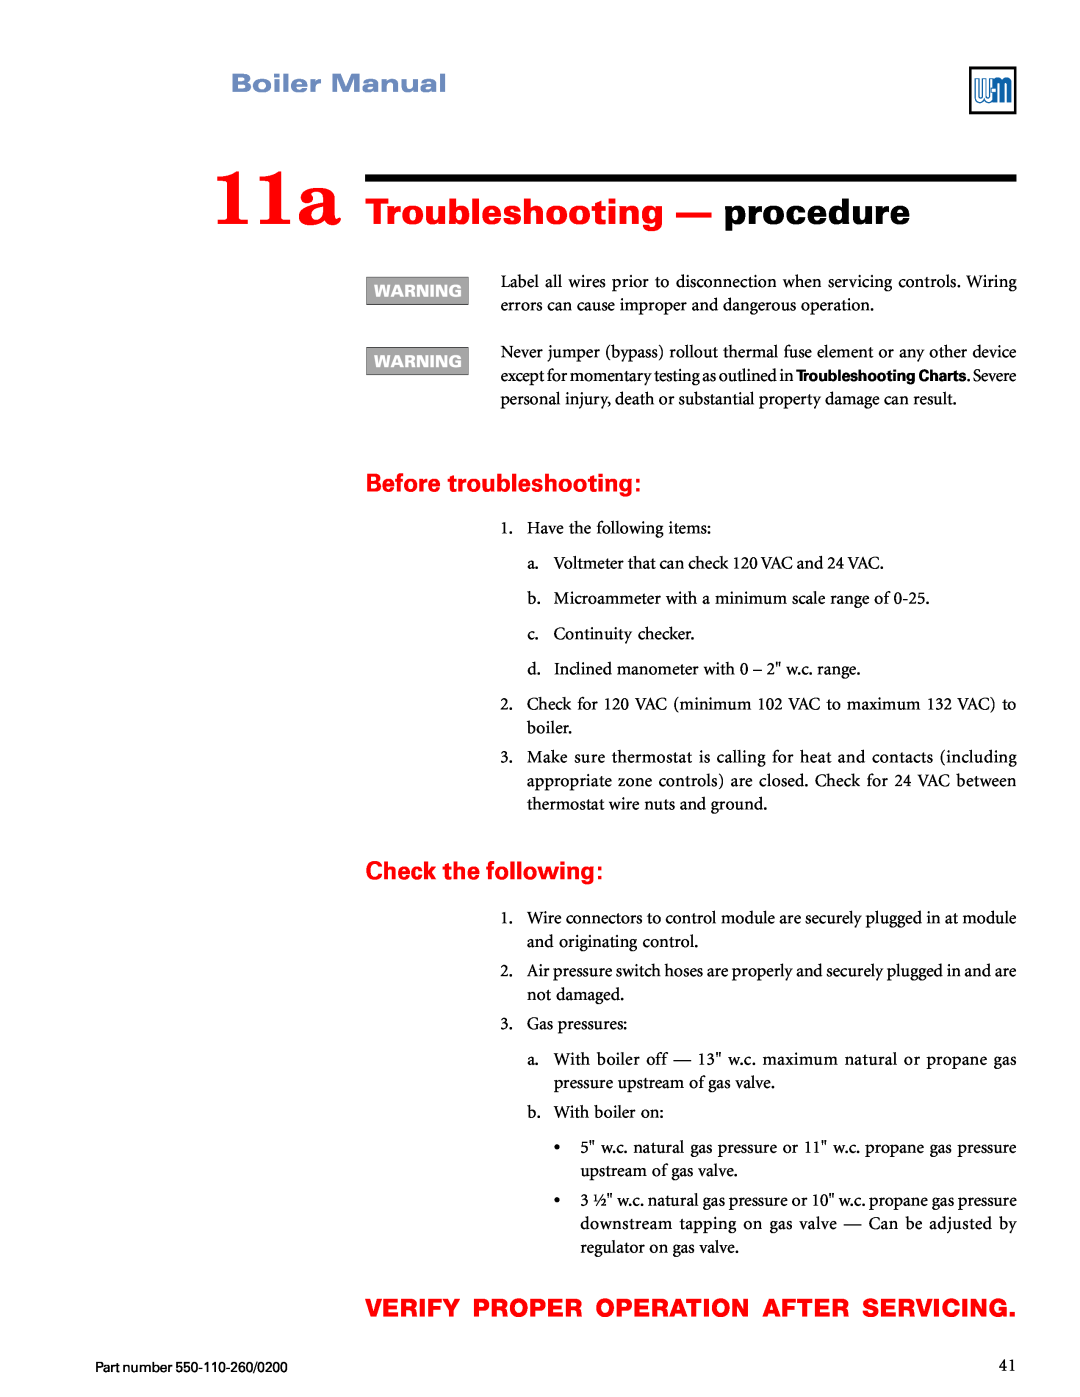 Weil-McLain 550-110-260/02002 11a Troubleshooting — procedure, Before troubleshooting, Check the following, Boiler Manual 